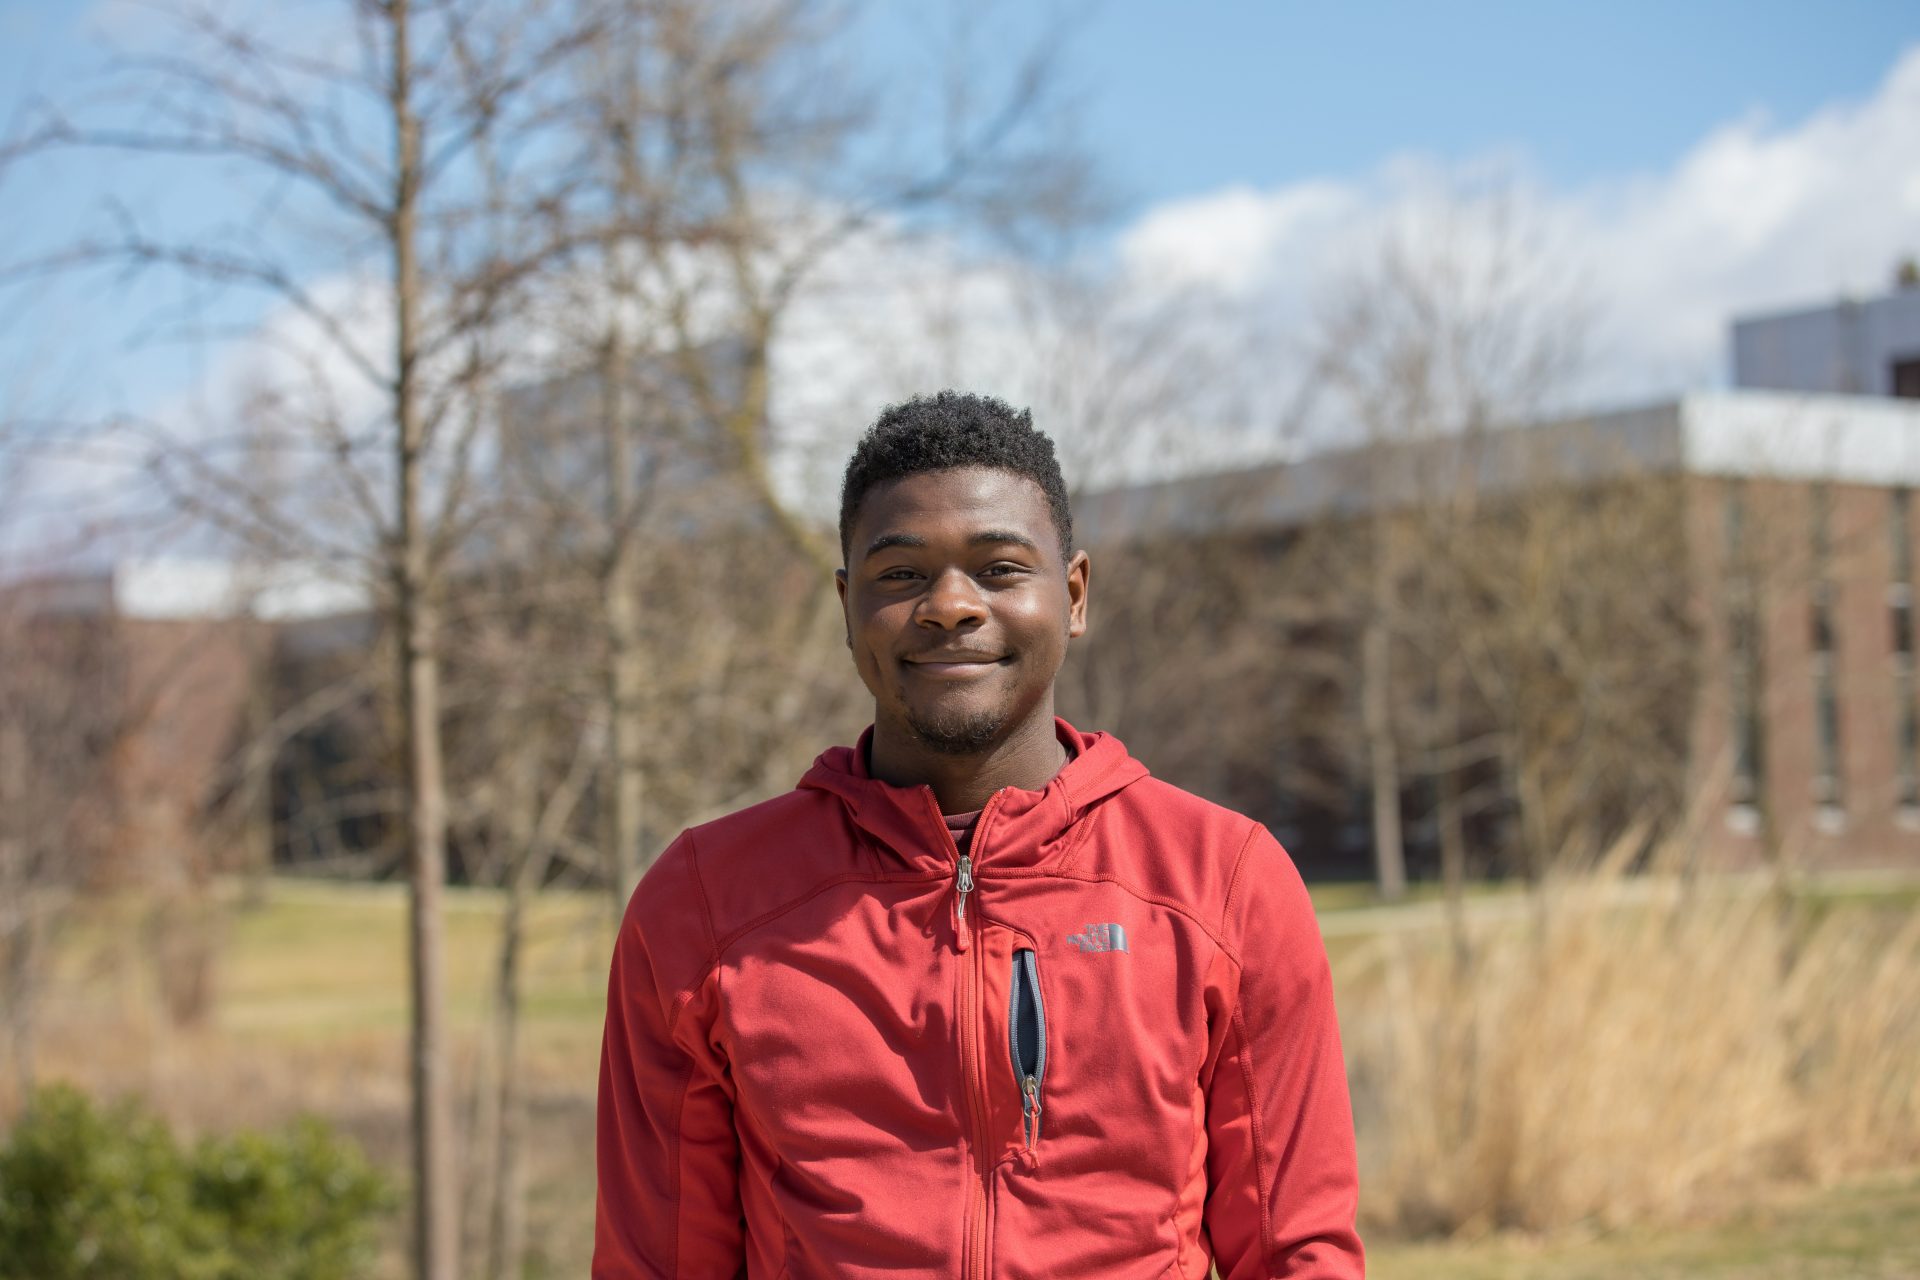 Robert Brown smiles for a portrait on campus.